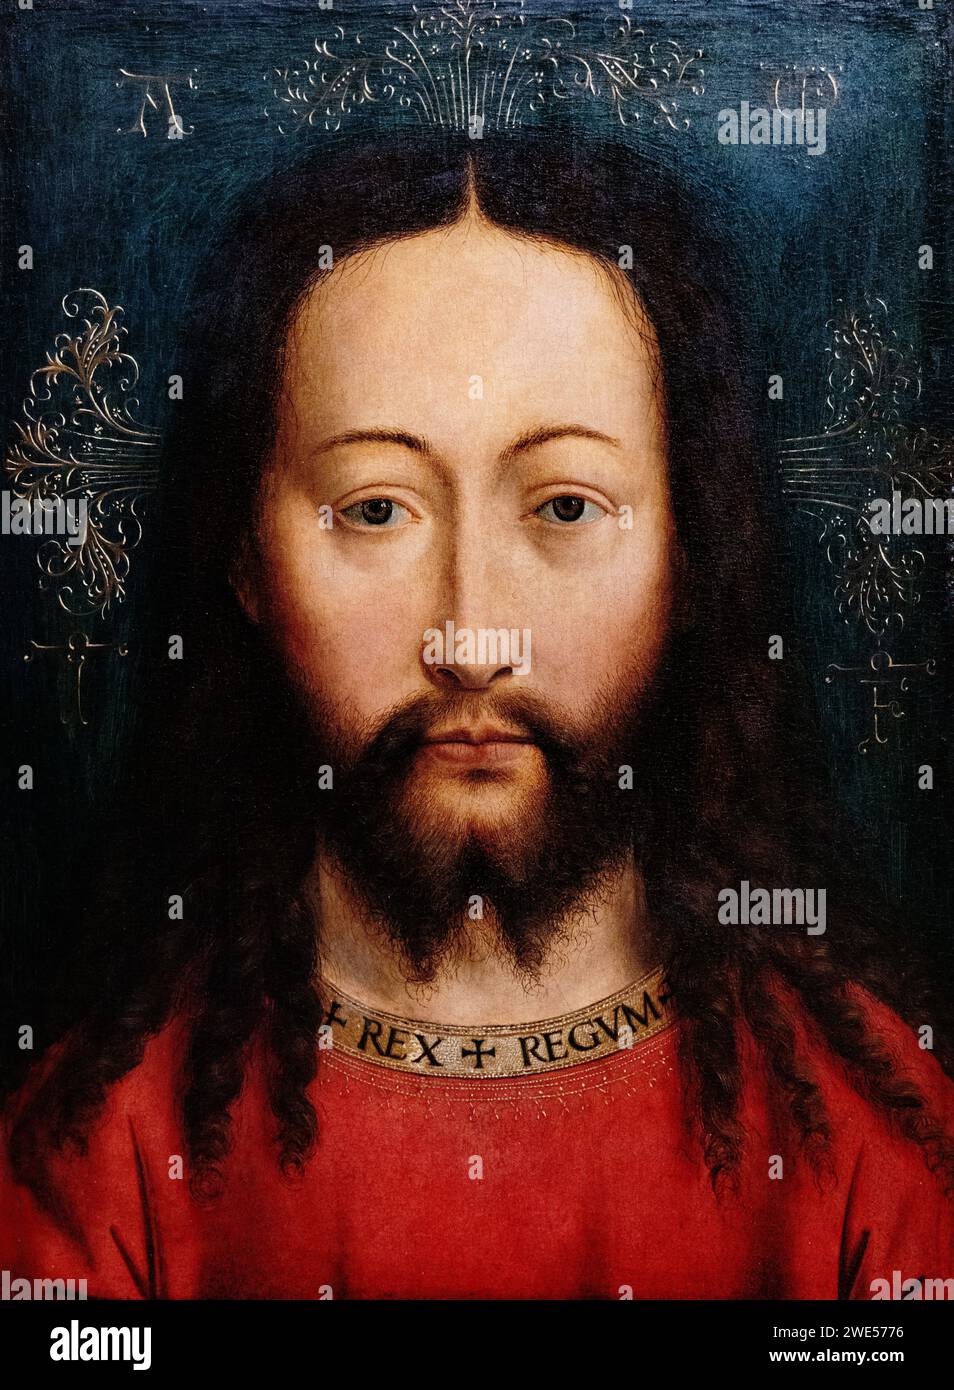 Copy after Jan van Eyck painting; 'The Holy Face of Christ' c.1500; oil on oak wood; Jesus Christ painting head and face. See additional notes. Stock Photo